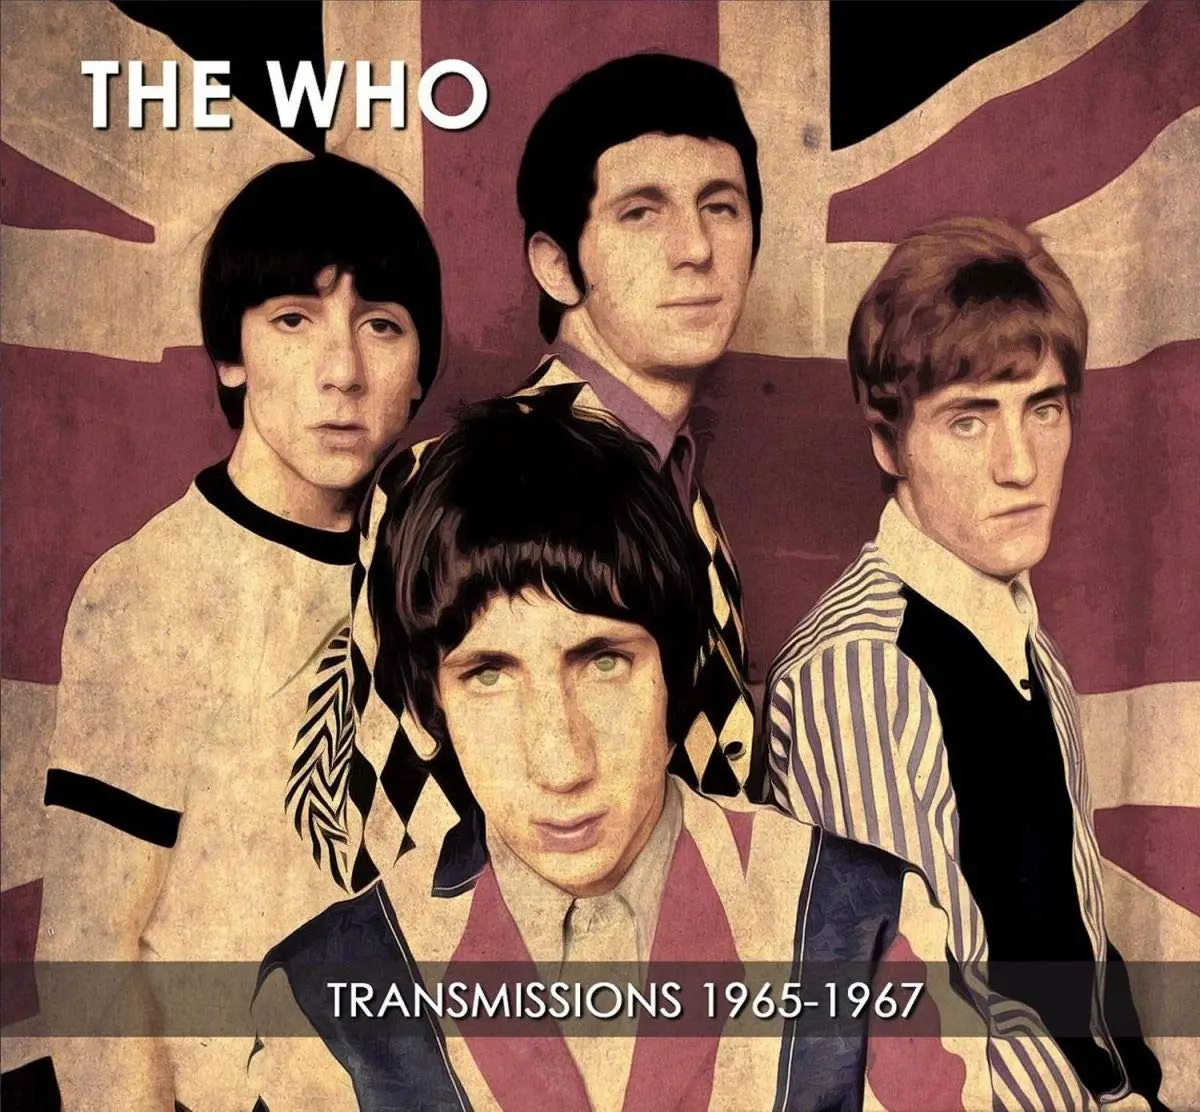 The who collection the who. Группа the who. The who 1965. The who обложки альбомов. The who 1967.